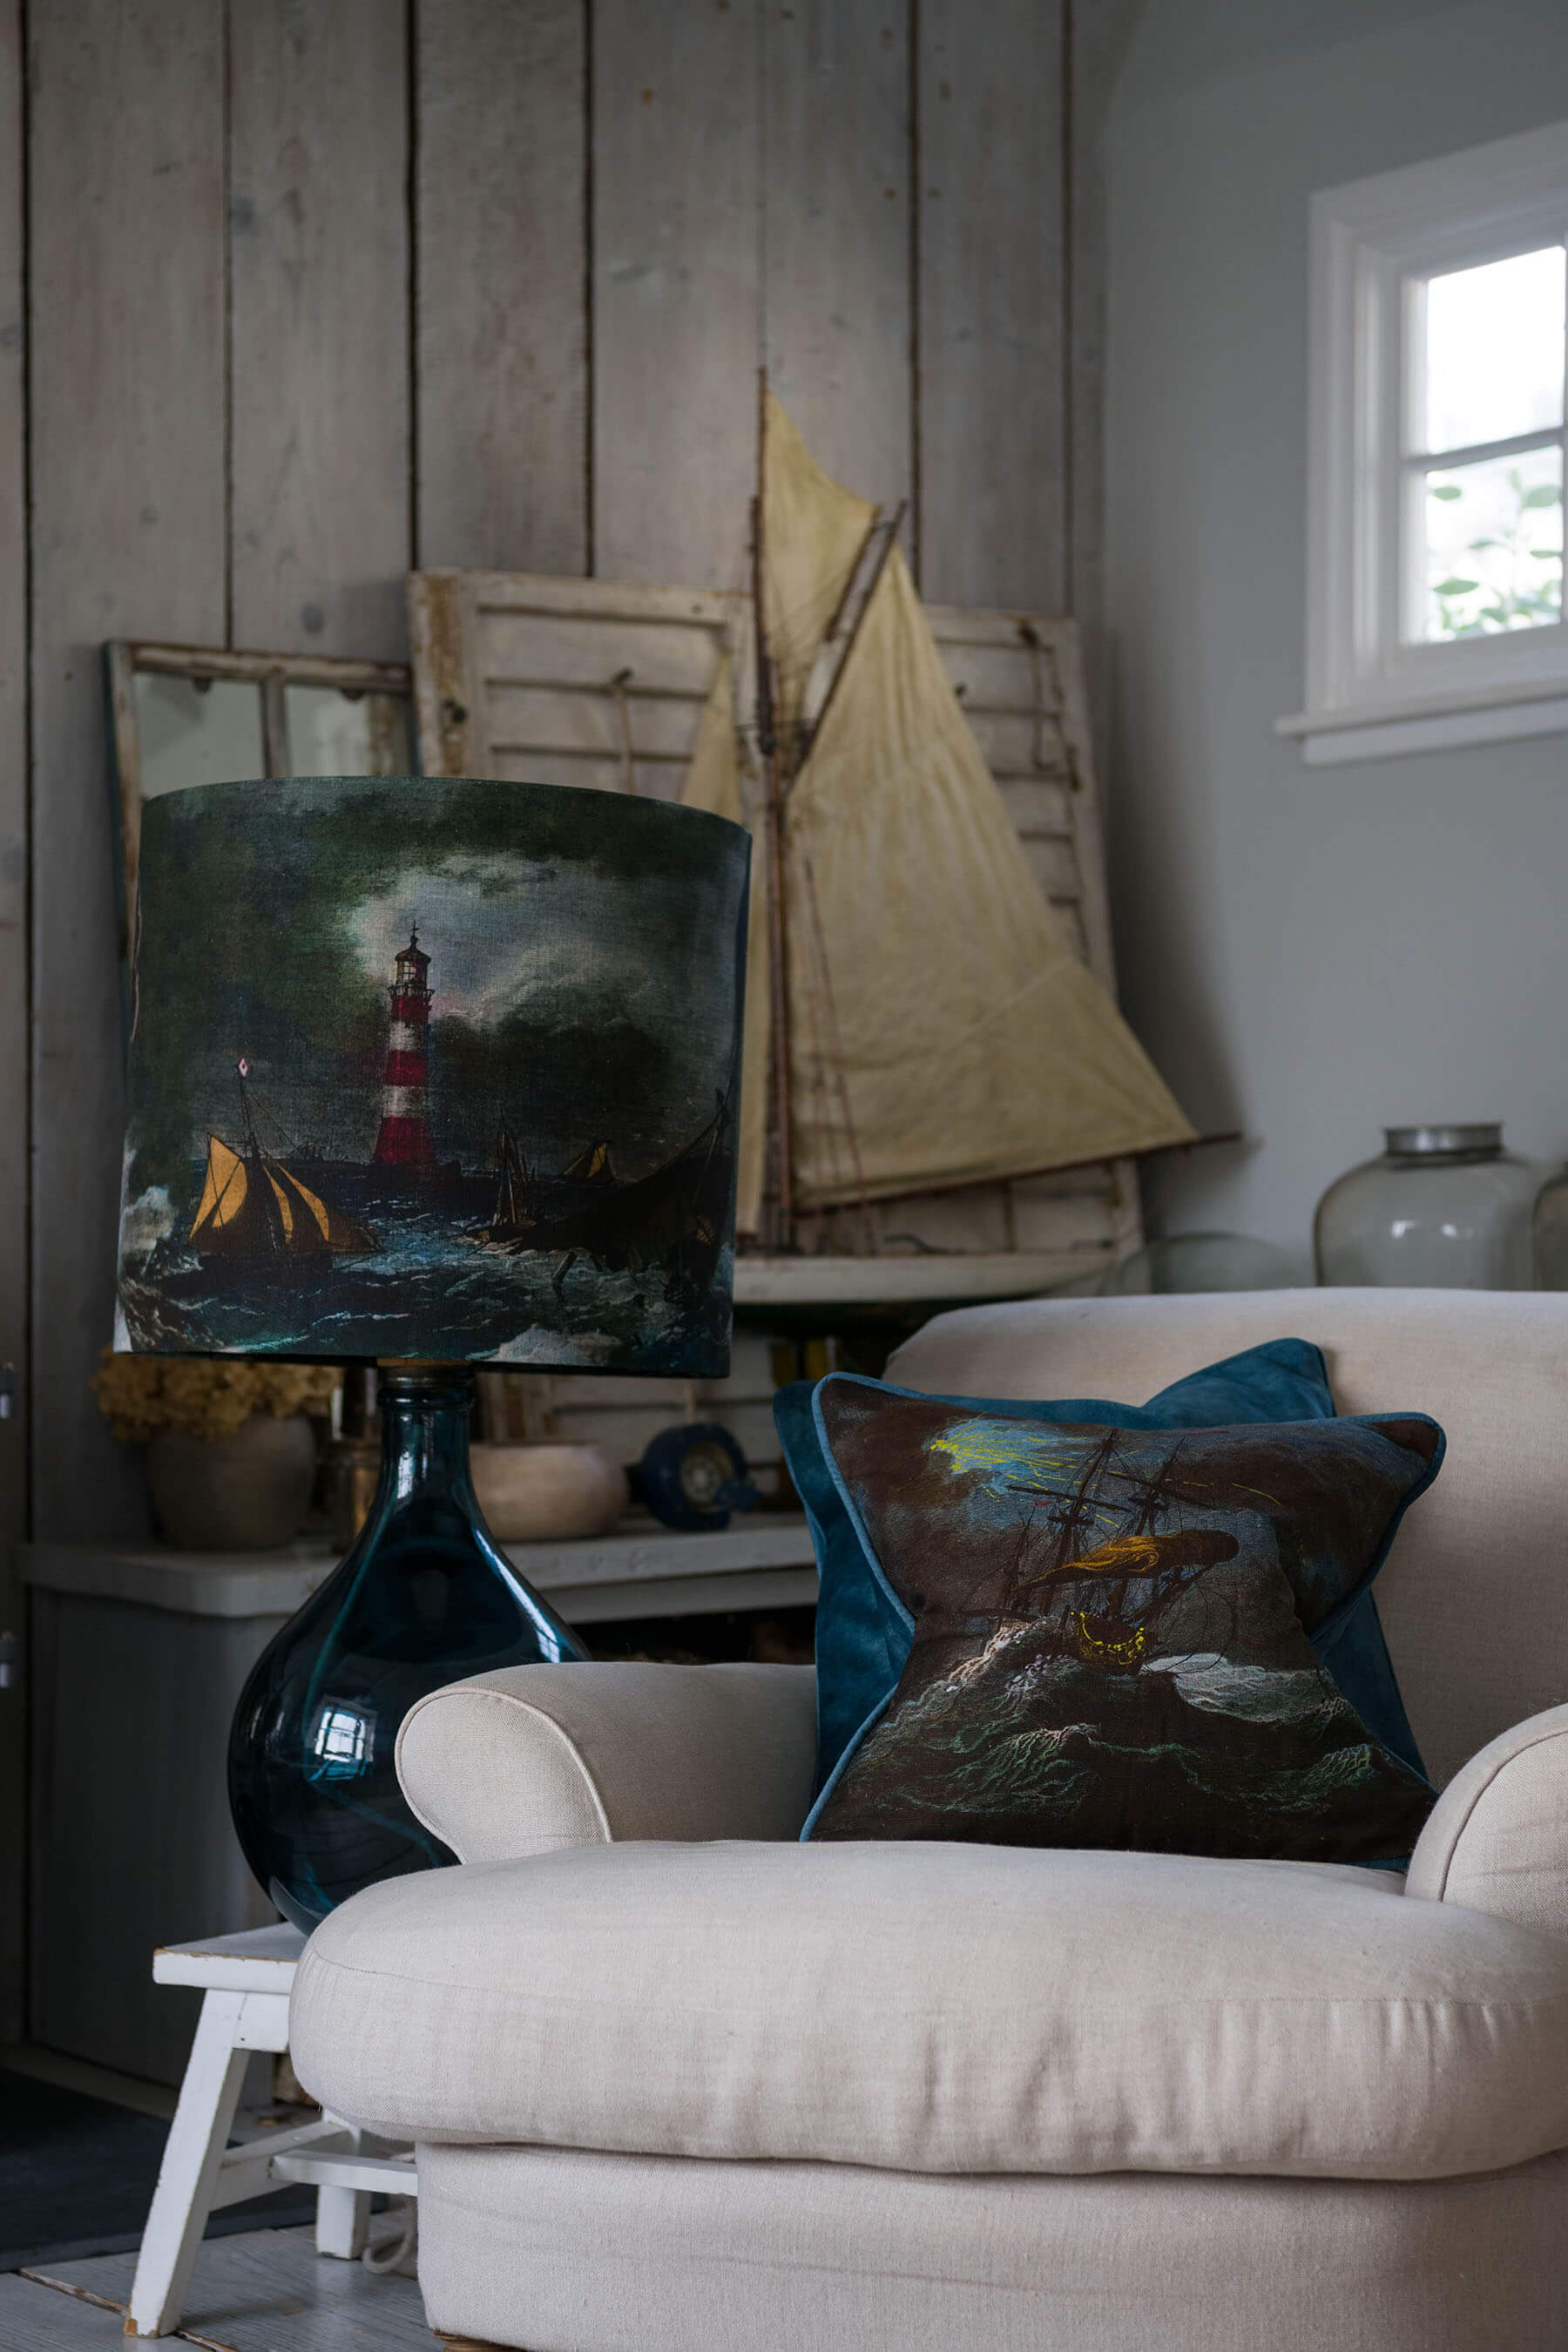 Shipwreck night cushion placed on a cream chair in front of a decorative sailing boat and other decorative items on a side table.Next to the chair is a matching lampshade on a petrol glass lampbase.